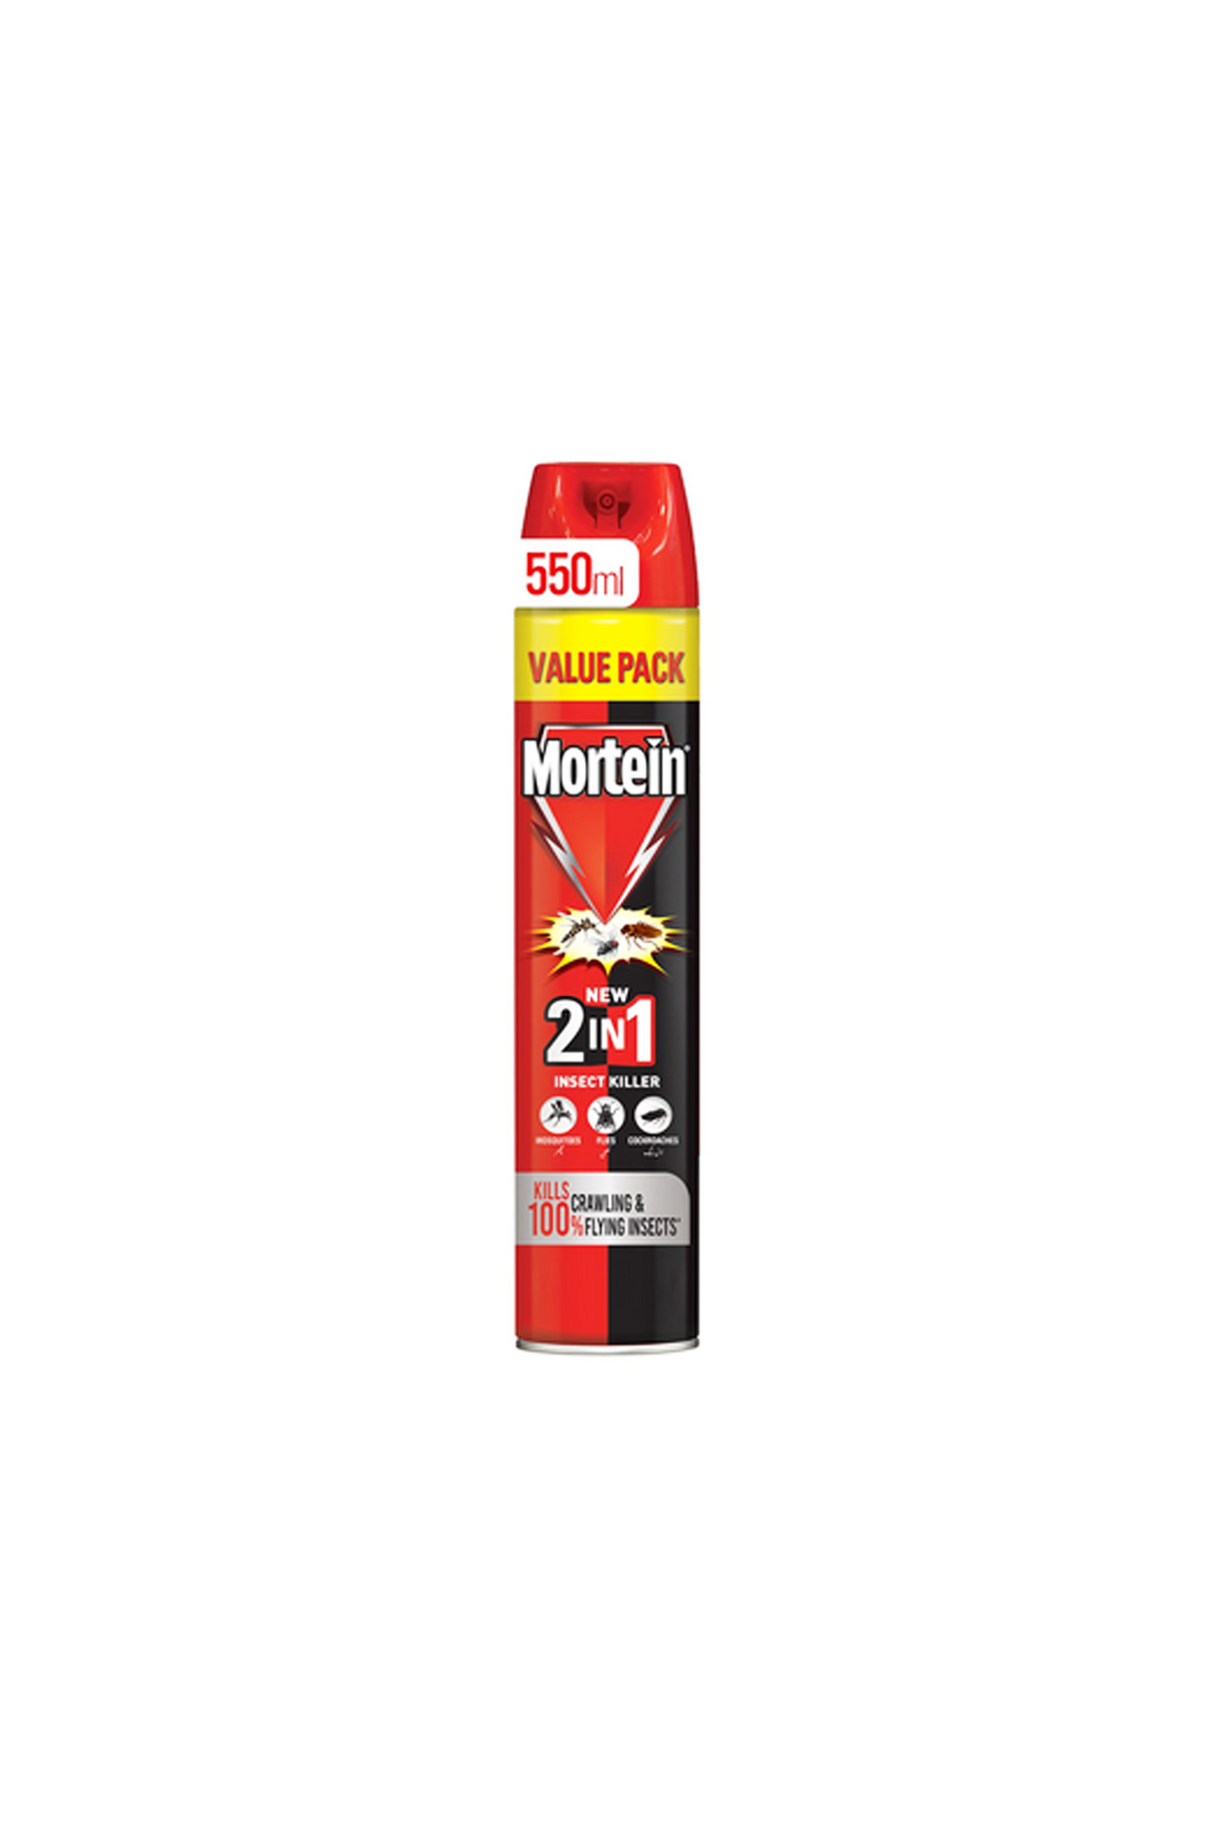 mortein insect killer 2in1 550ml